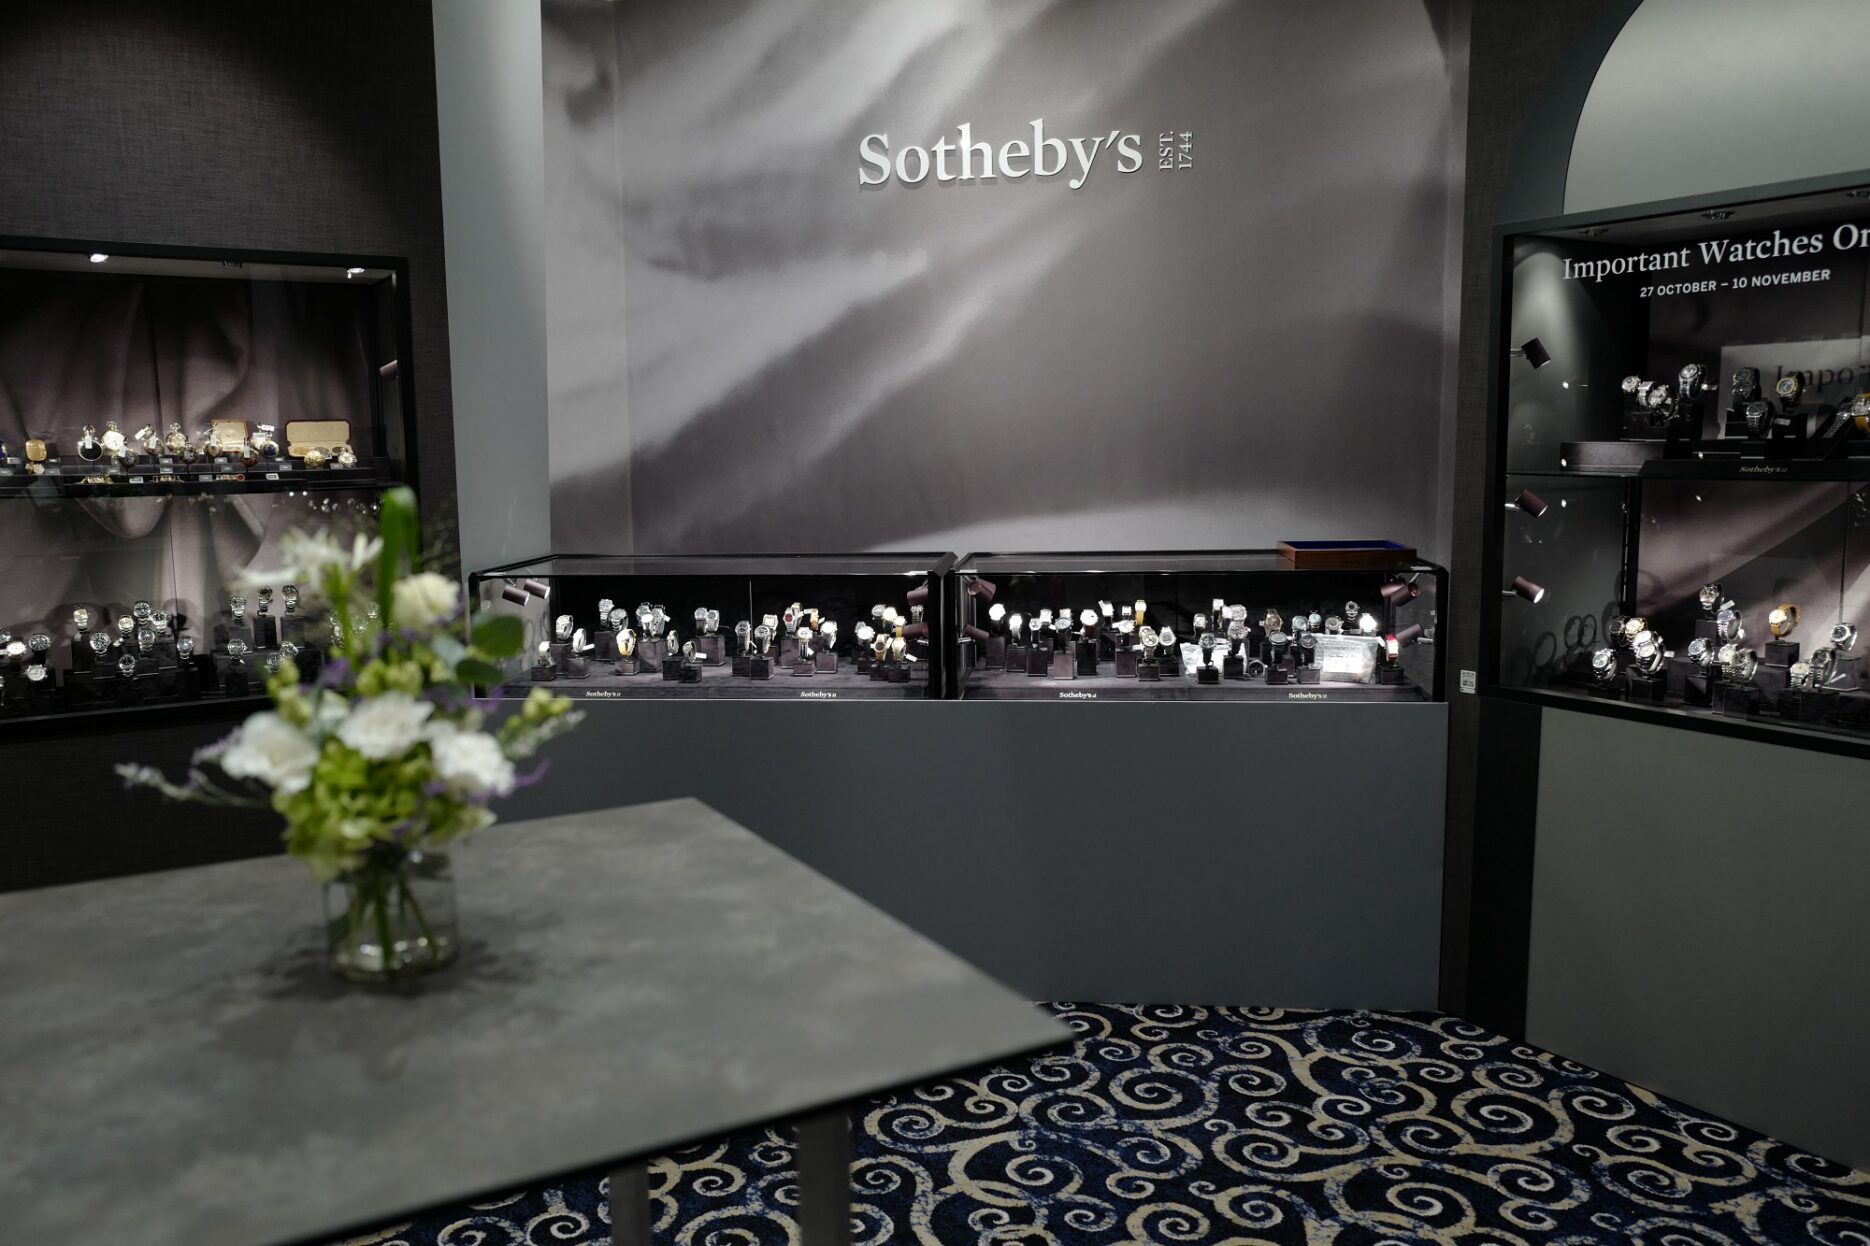 Credit: Sotheby's/Weibo